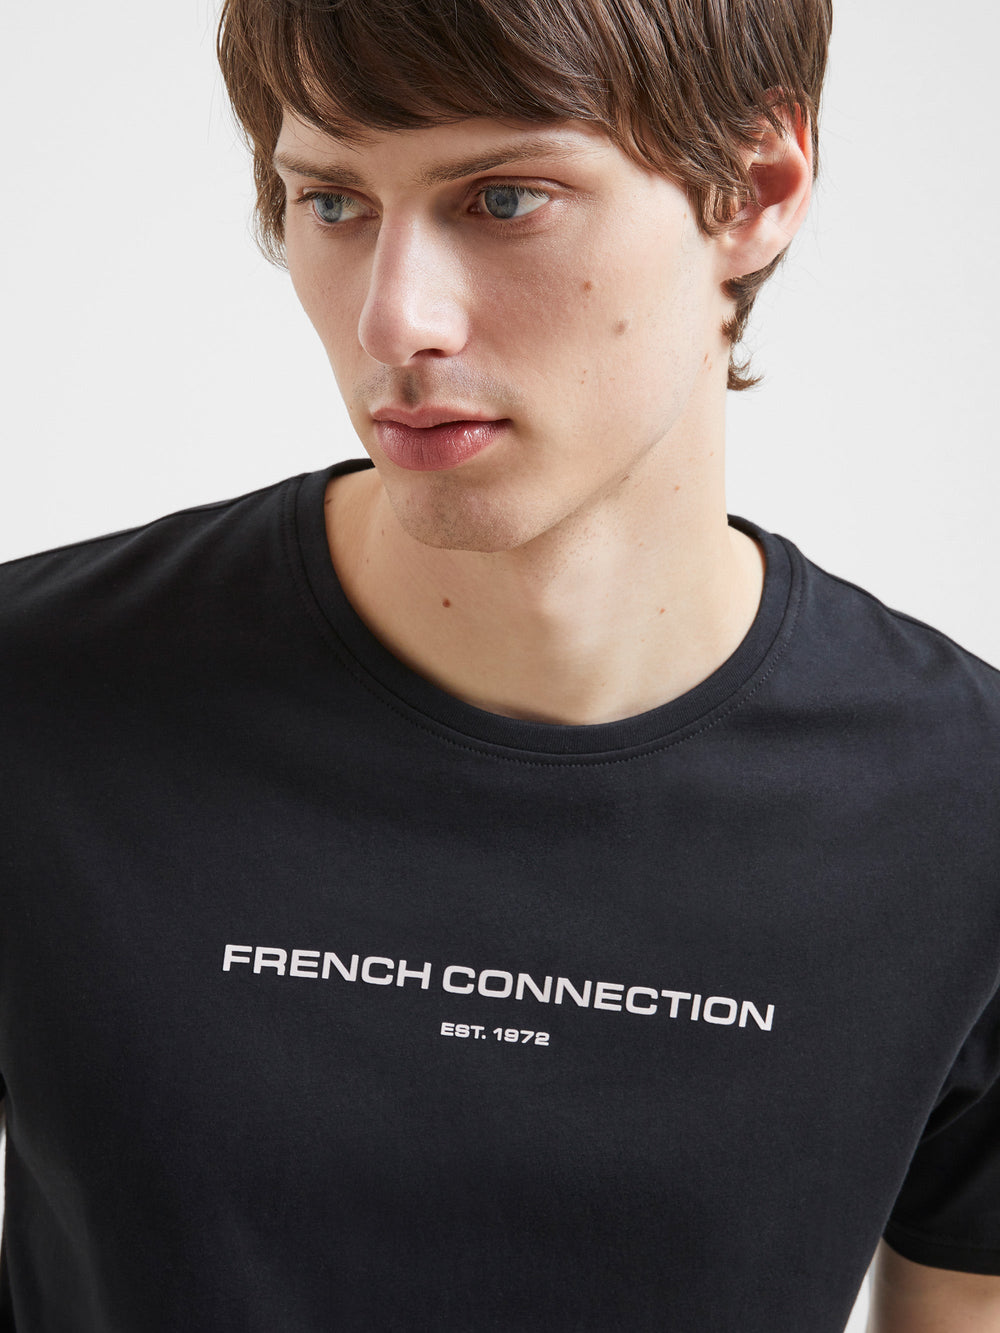 French Connection T-Shirt | French Connection EU